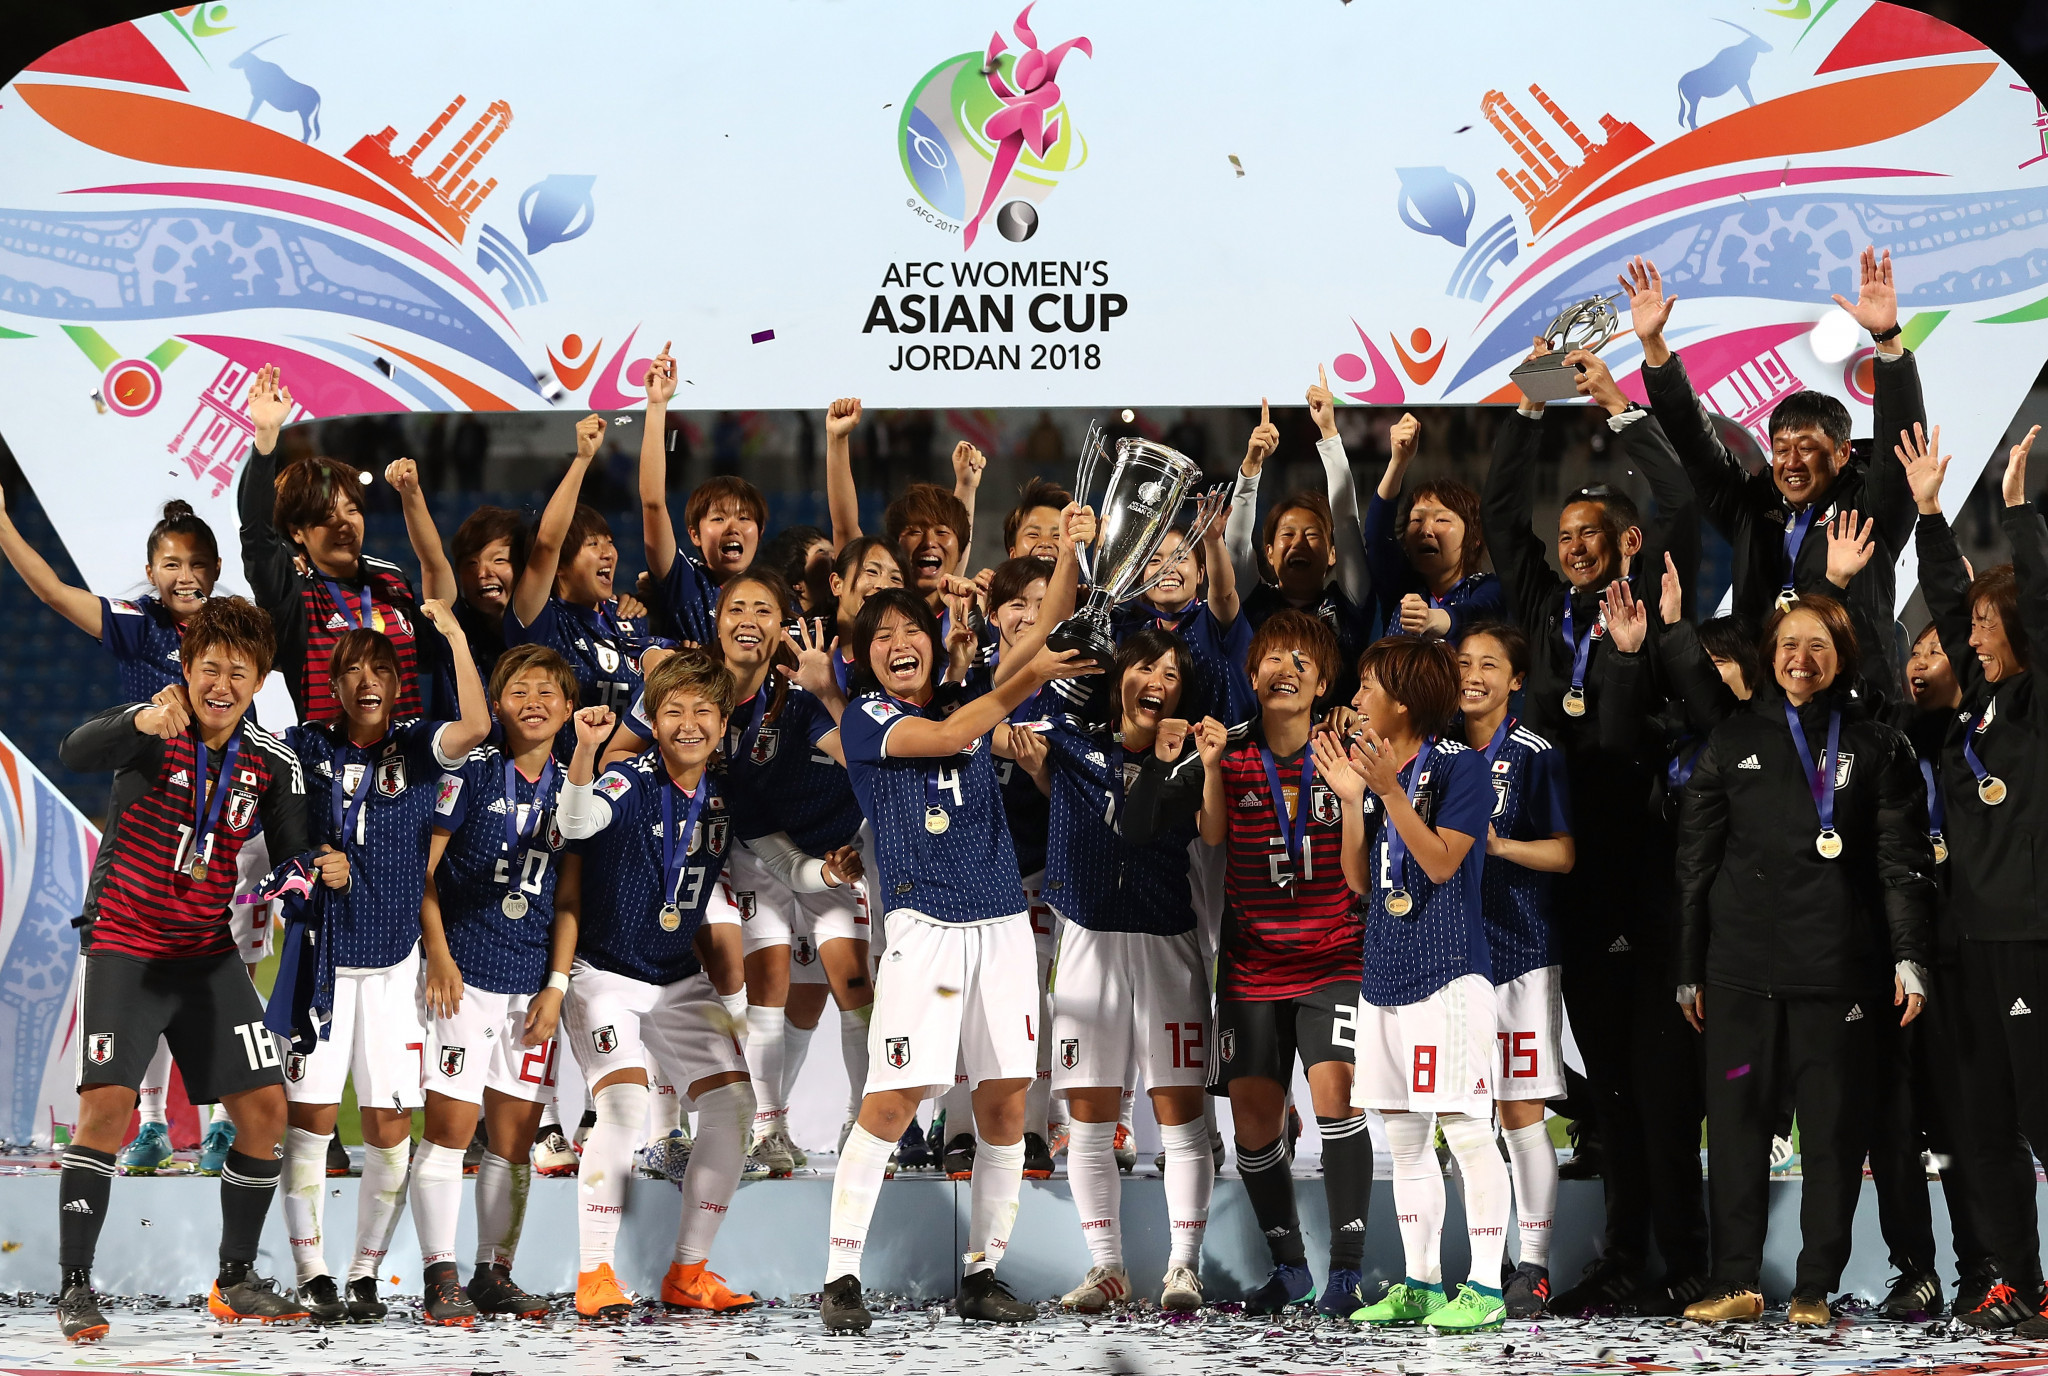 Japan are the reigning champions in the AFC Women's Asian Cup having won in Jordan in 2018 ©Getty Images